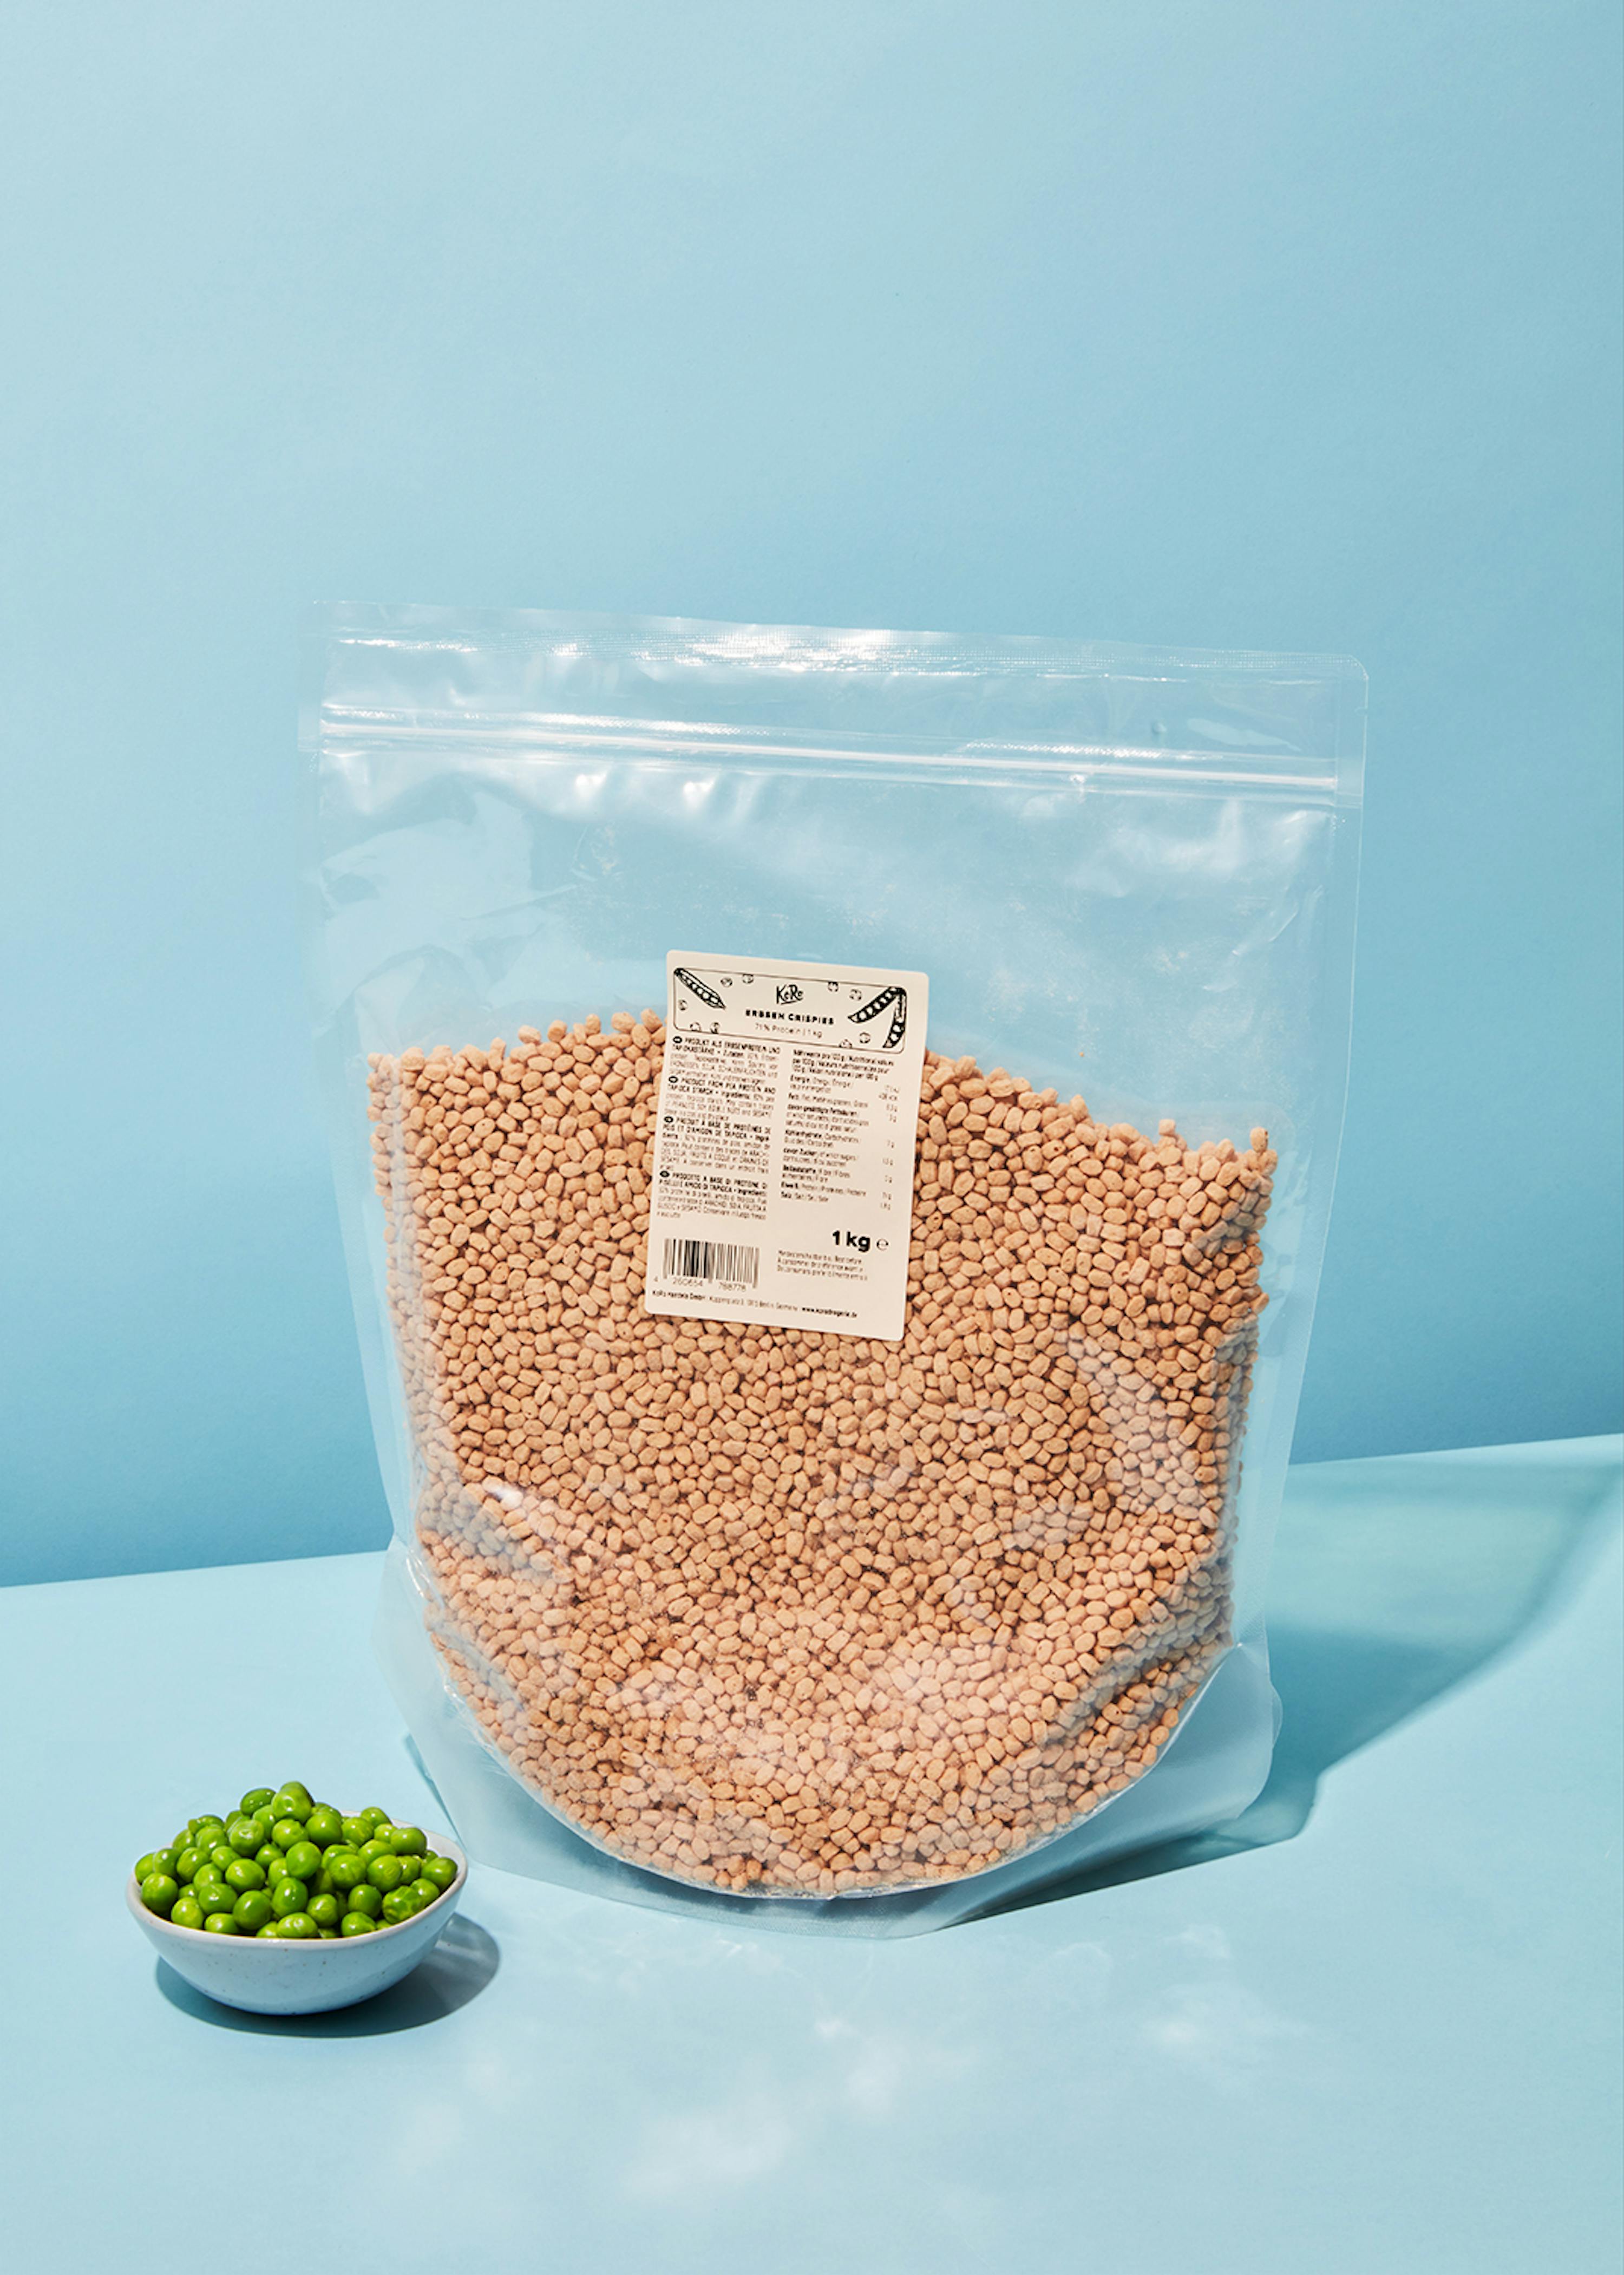 KoRo - Soy Protein Crispies 1 kg - 60% Protein Vegan Value Pack :  : Grocery